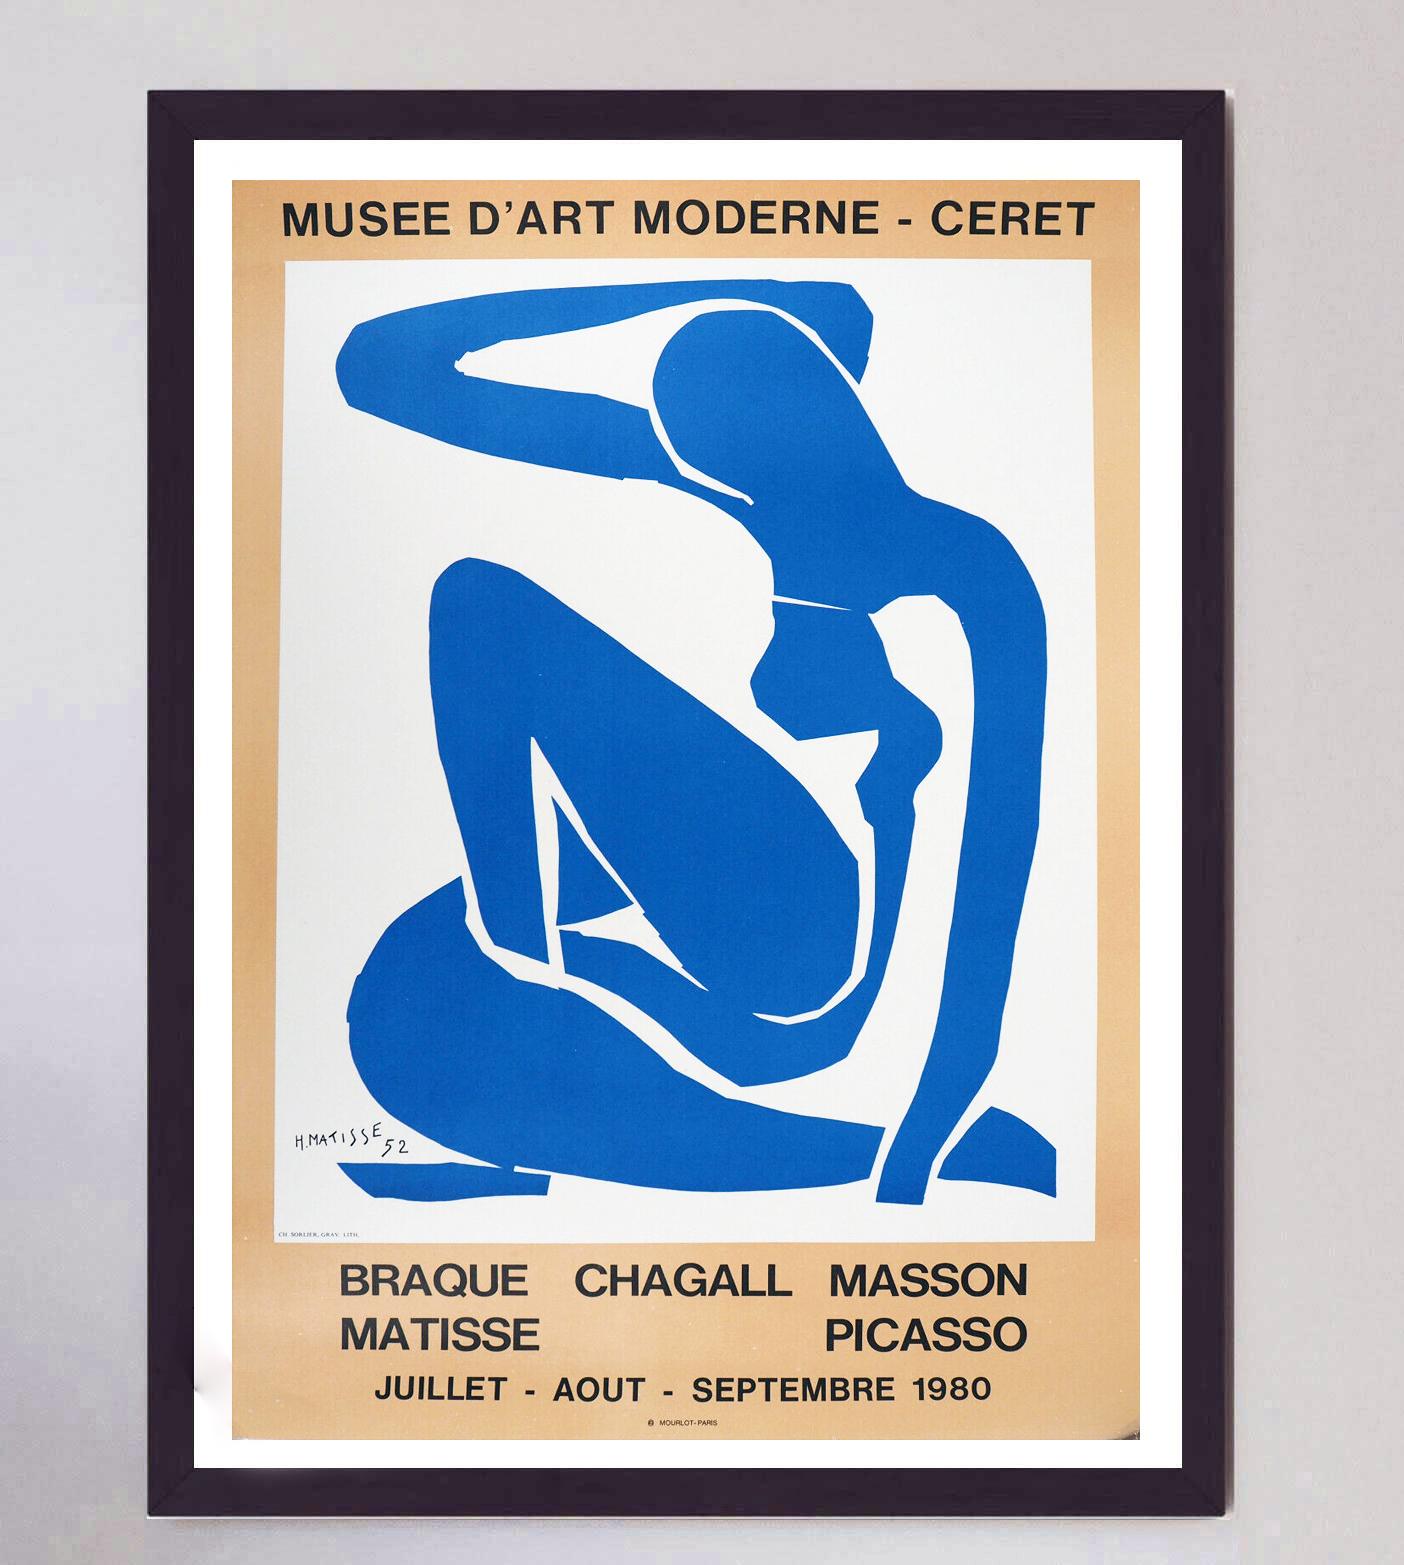 Depicting Nud Bleu II from the cut-out series from the late 1940s, this gorgeous poster was created to promote an exhibition featuring the works of the painter Matisse as well as Braque, Chagall, Masson and Picasso at the Musee d'Art Moderne in